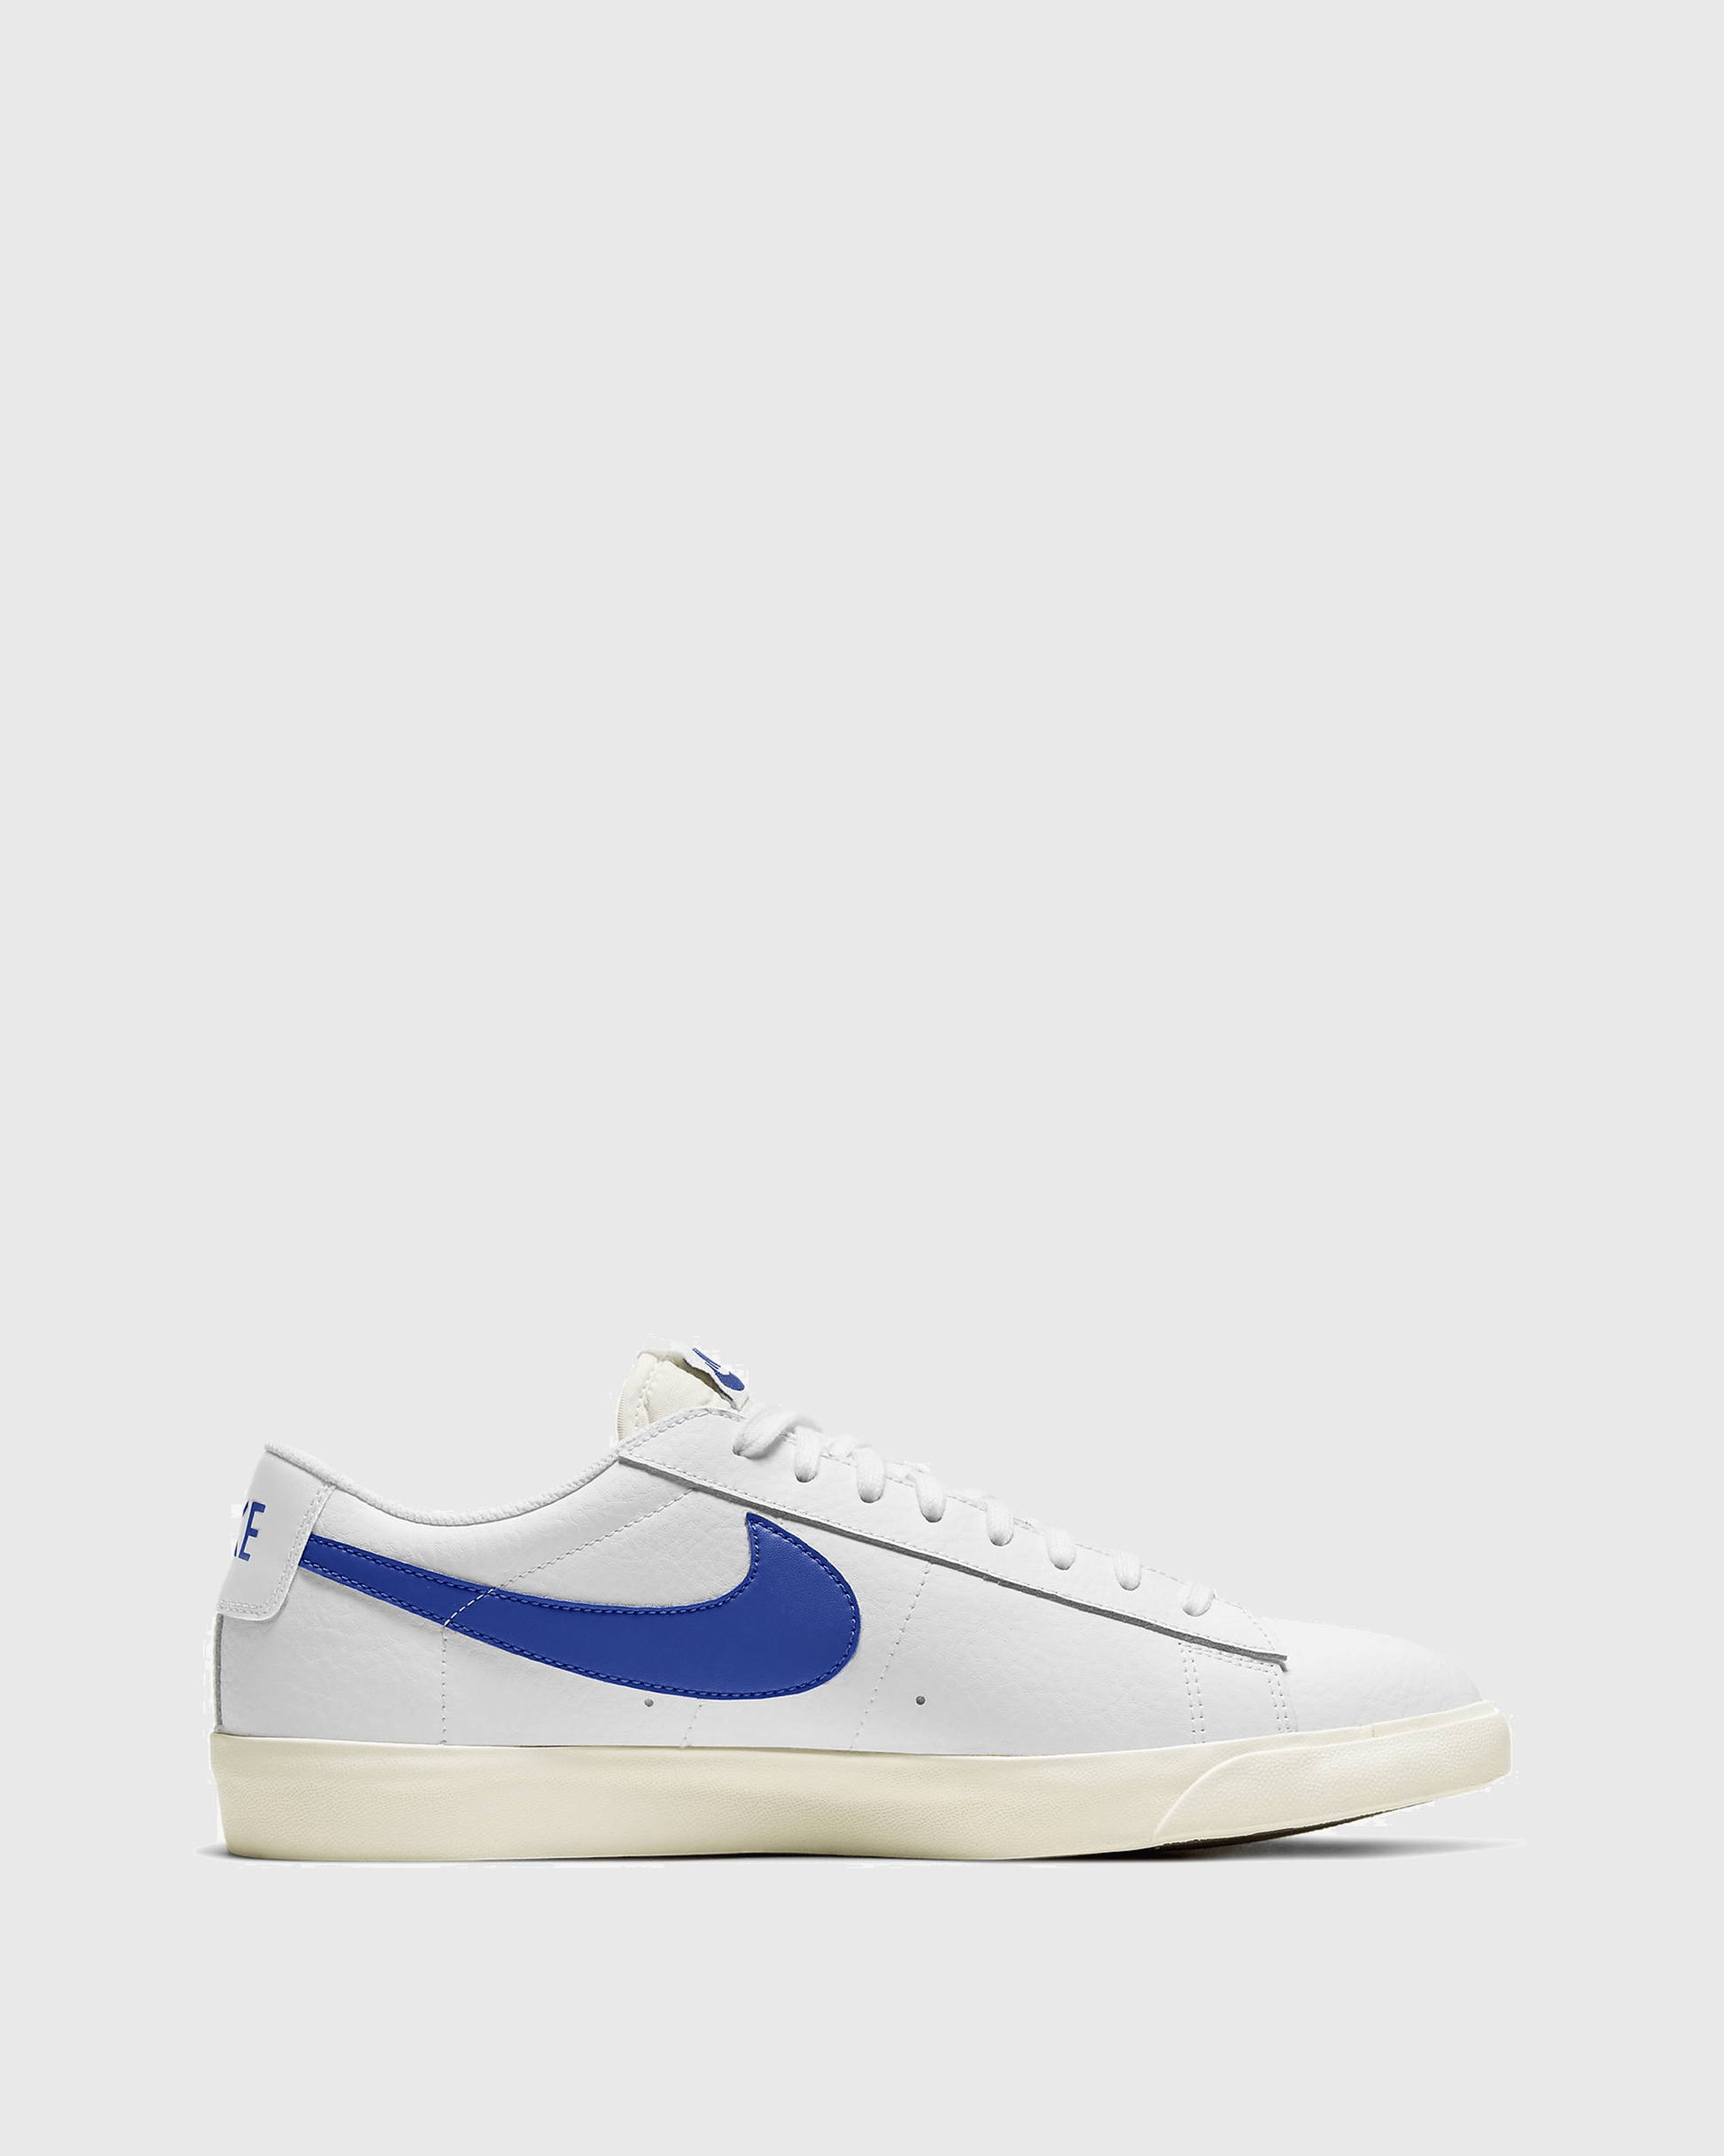 Nike Men's Sneakers Blazer Low Leather in White/Astronomy Blue